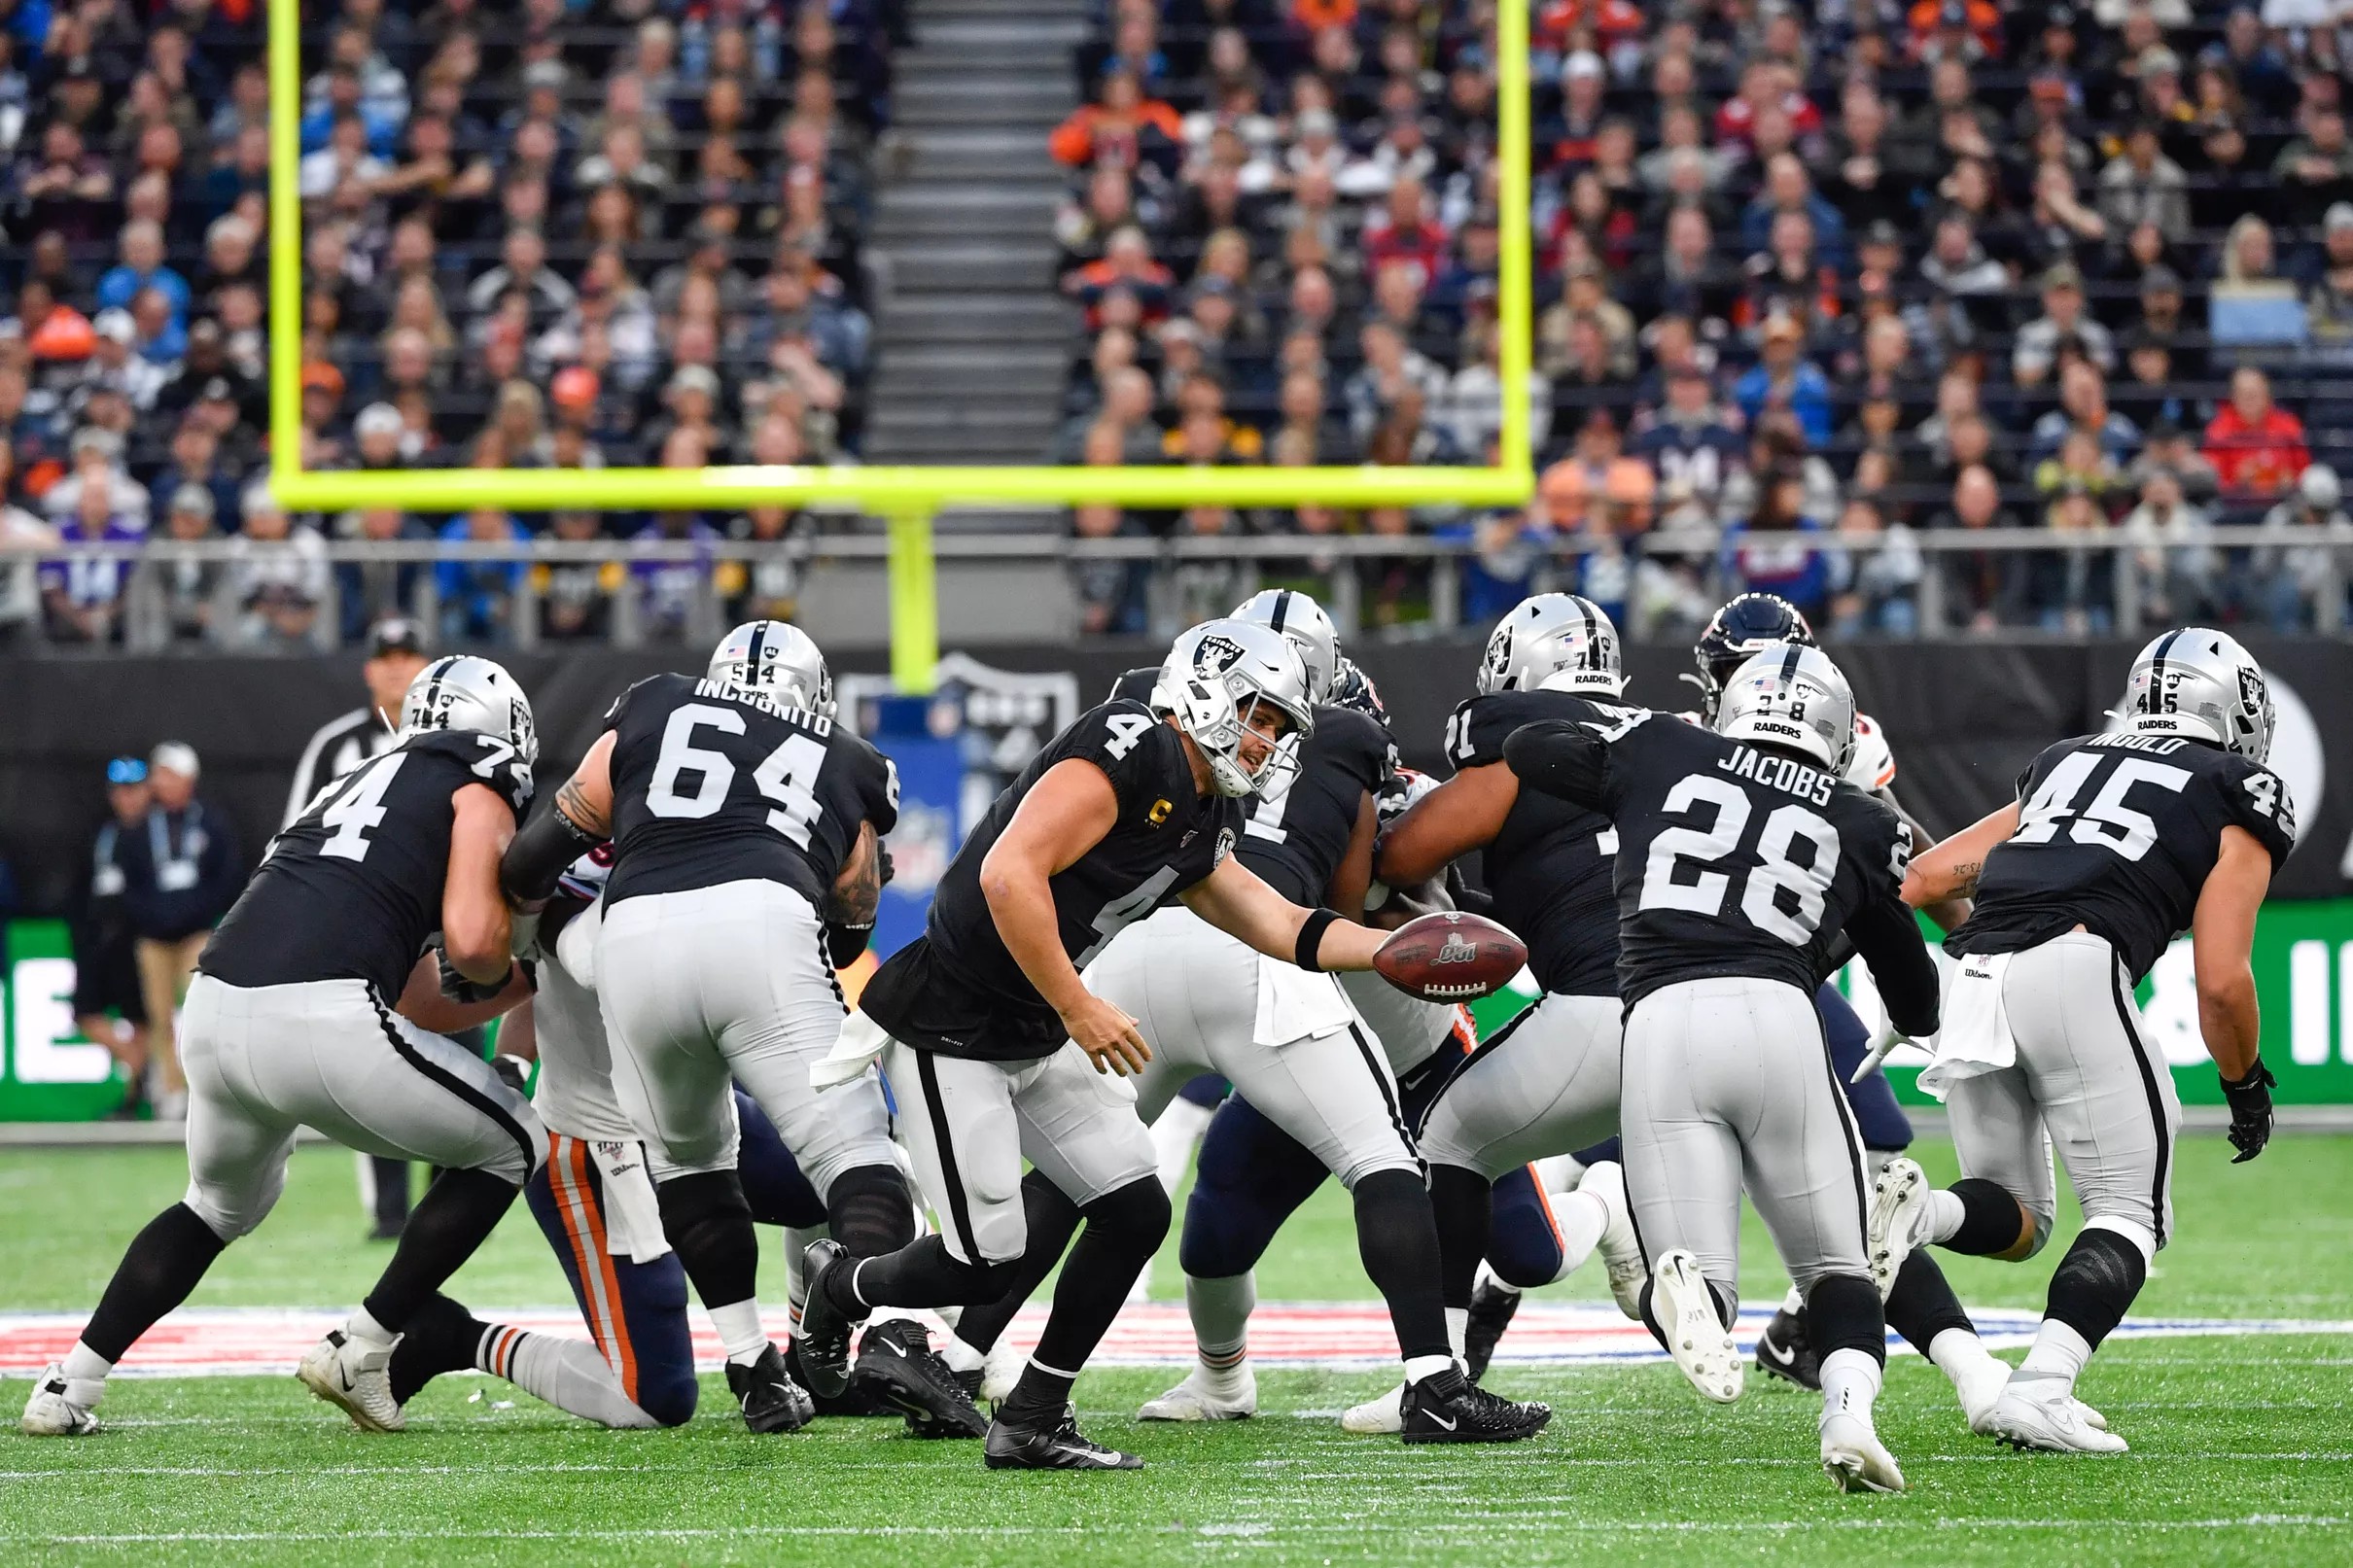 Raiders took challenge vs Bears D line ‘personally’ and ‘punched them